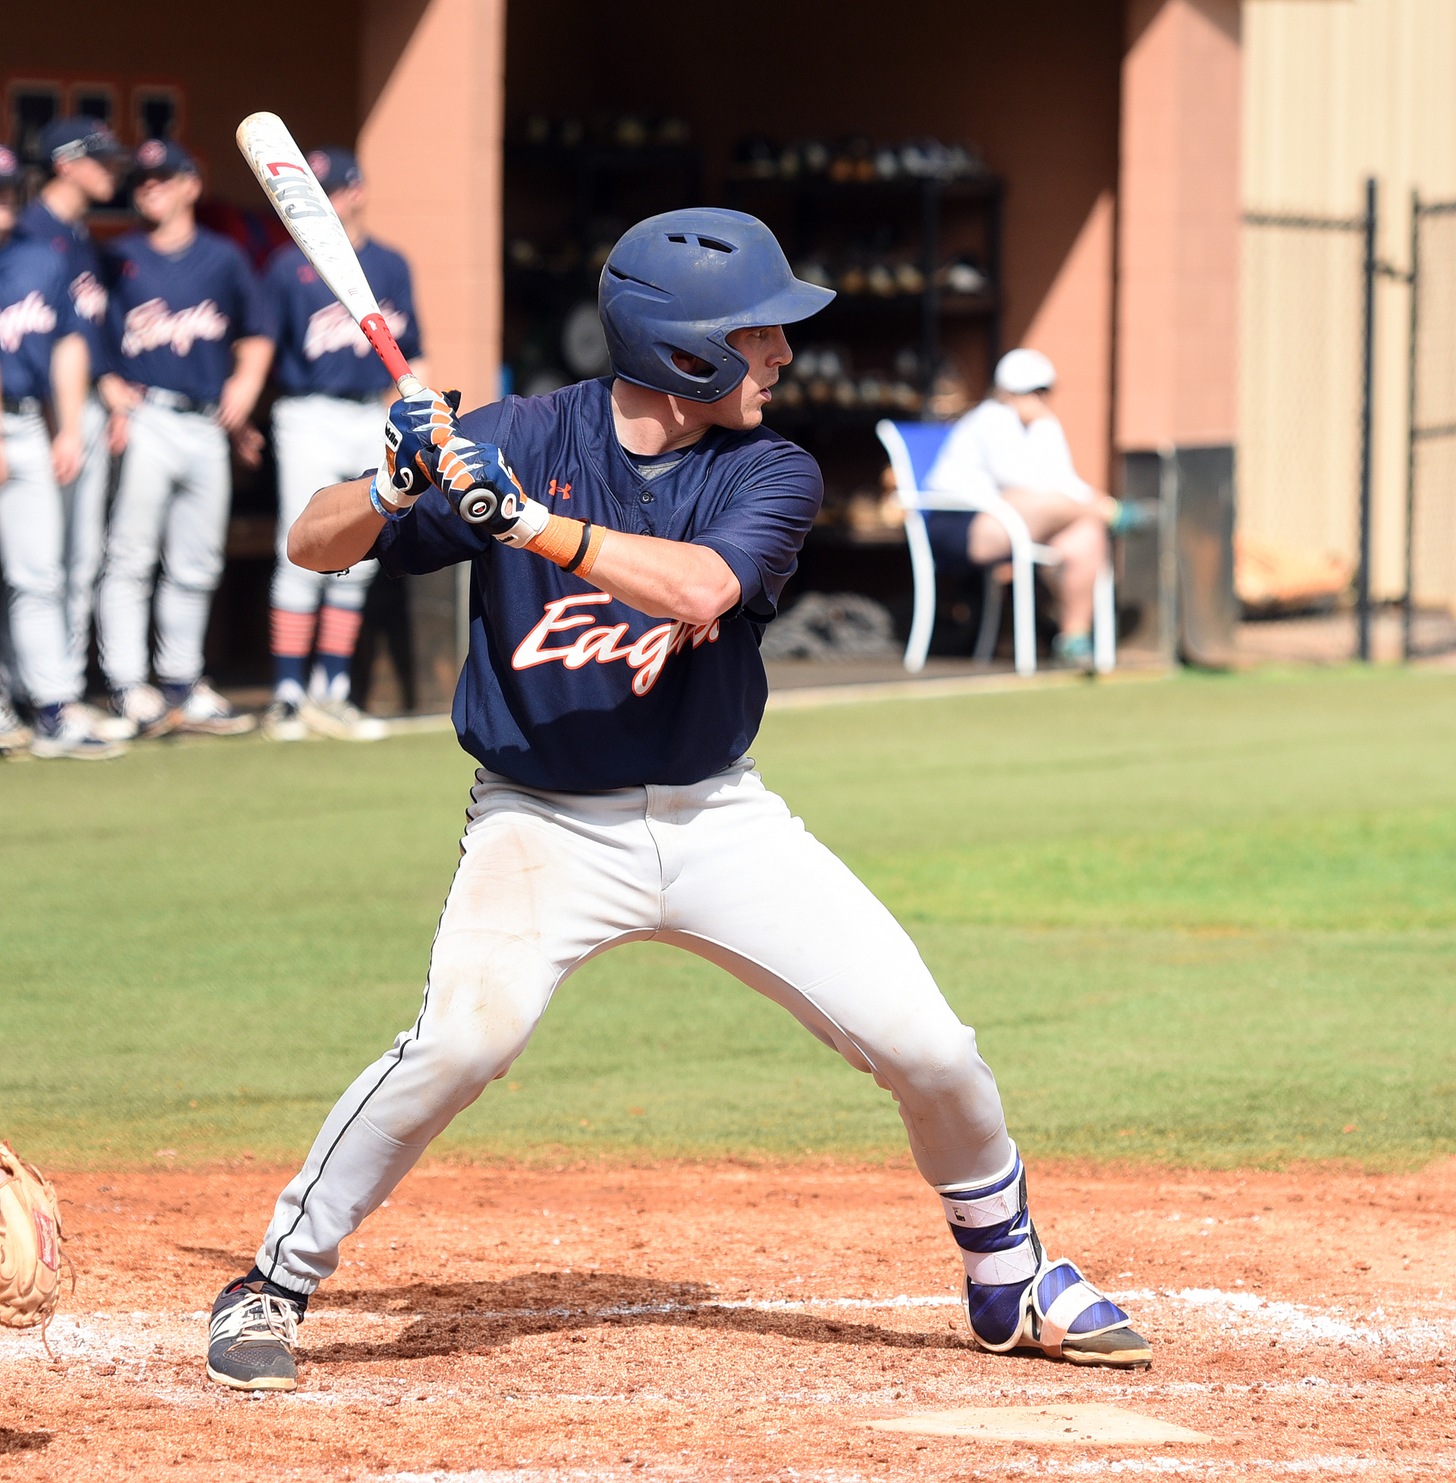 Late bursts propel Saints to walk-off wins over Eagles